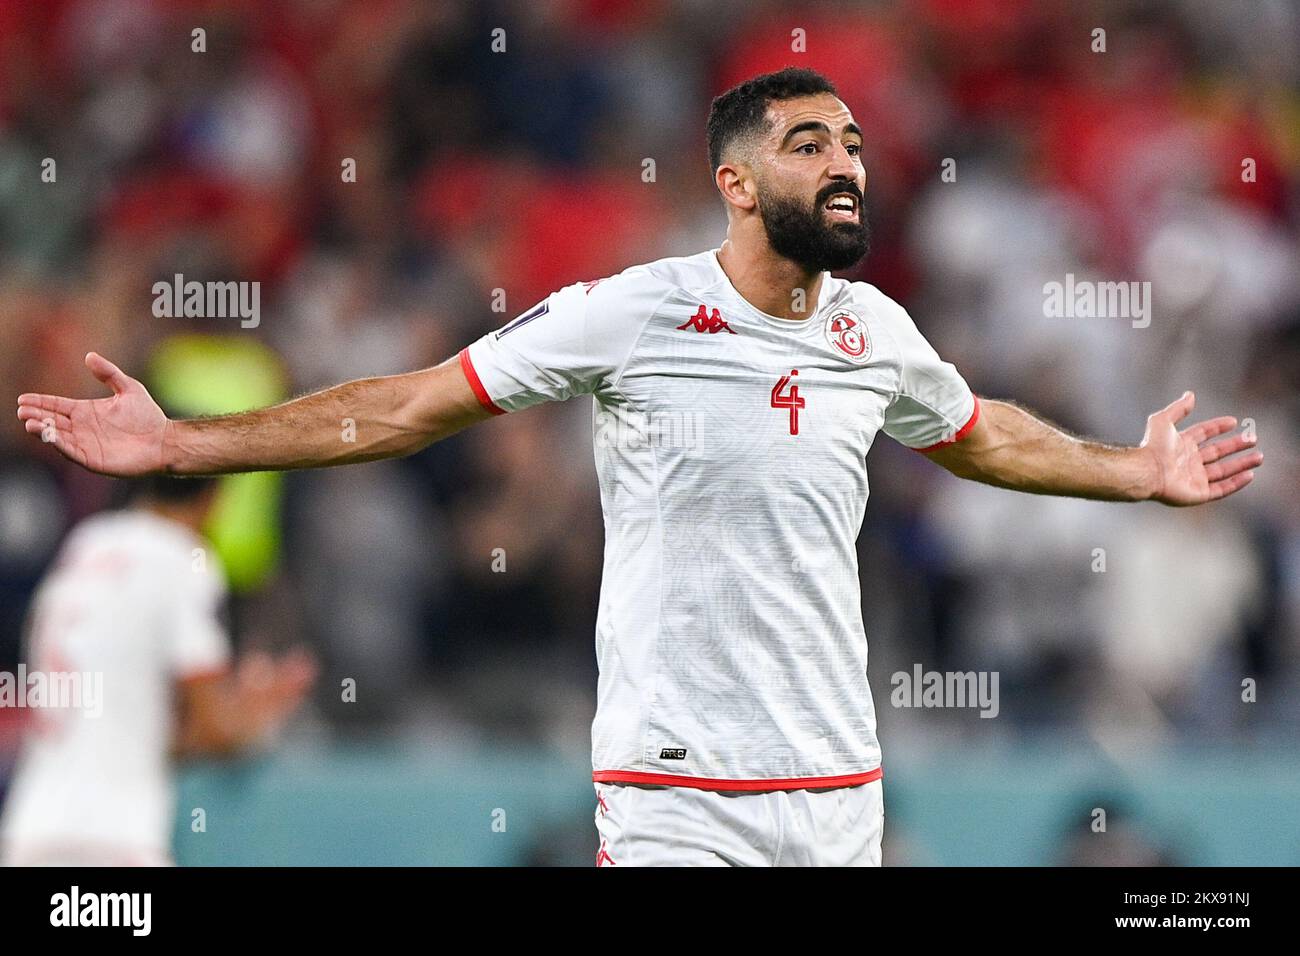 AL RAYYAN, QATAR - NOVEMBER 30: Yassine Meriah of Tunisia reacts during the Group D - FIFA World Cup Qatar 2022 match between Tunisia and France at the Education City Stadium on November 30, 2022 in Al Rayyan, Qatar (Photo by Pablo Morano/BSR Agency) Credit: BSR Agency/Alamy Live News Stock Photo